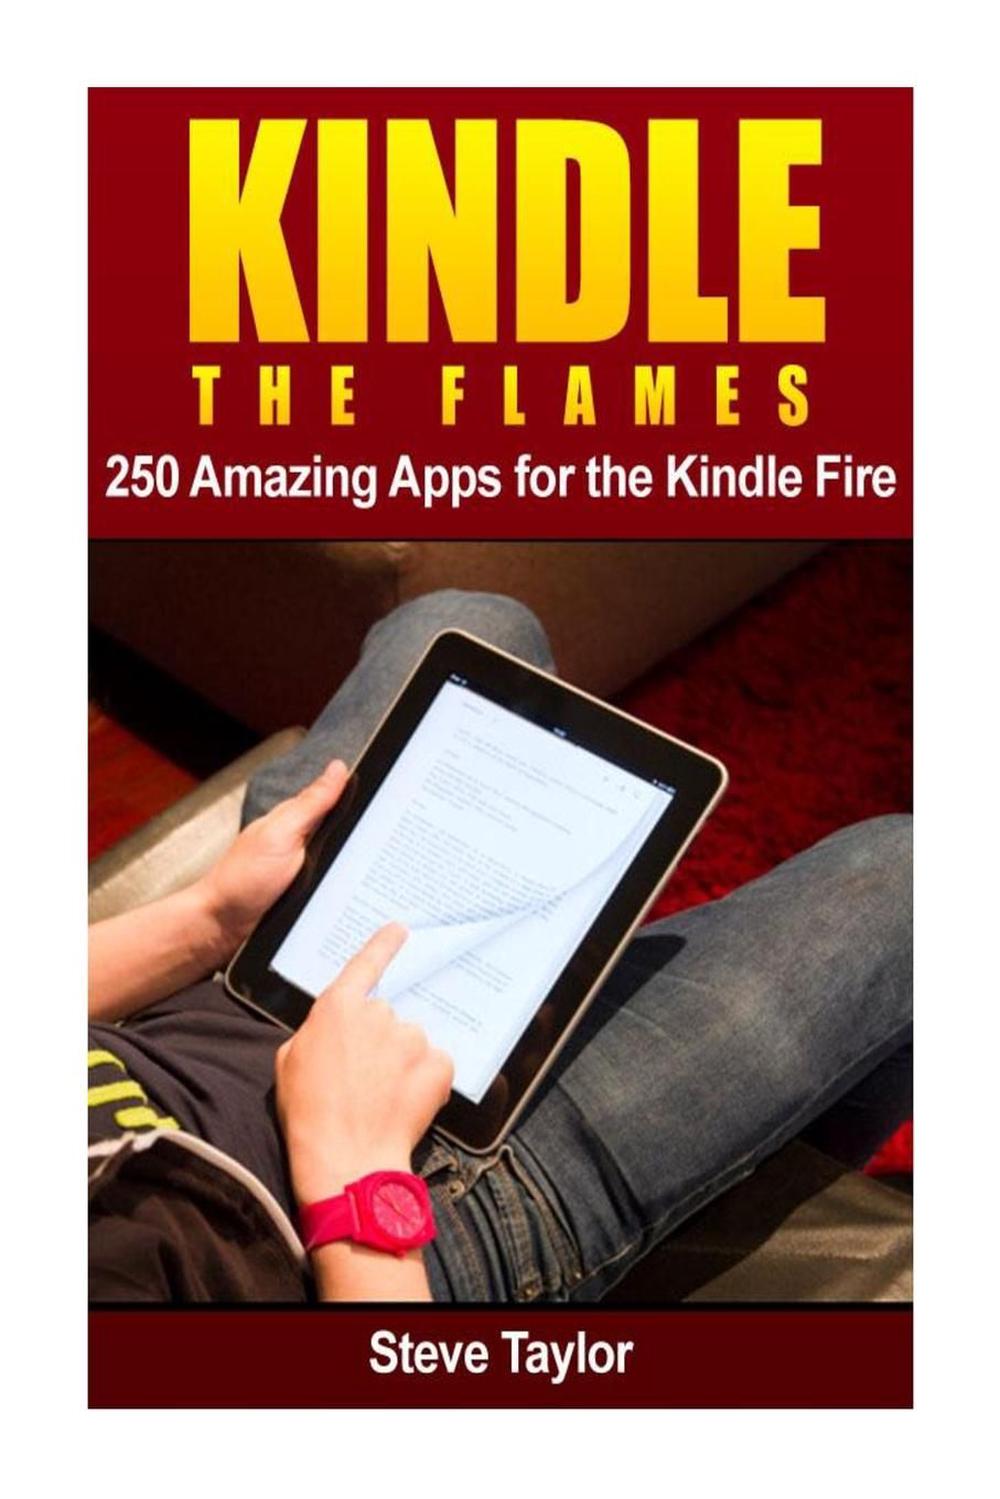 Kindle the Flames 250 Amazing Apps for the Kindle Fire HD by Steve